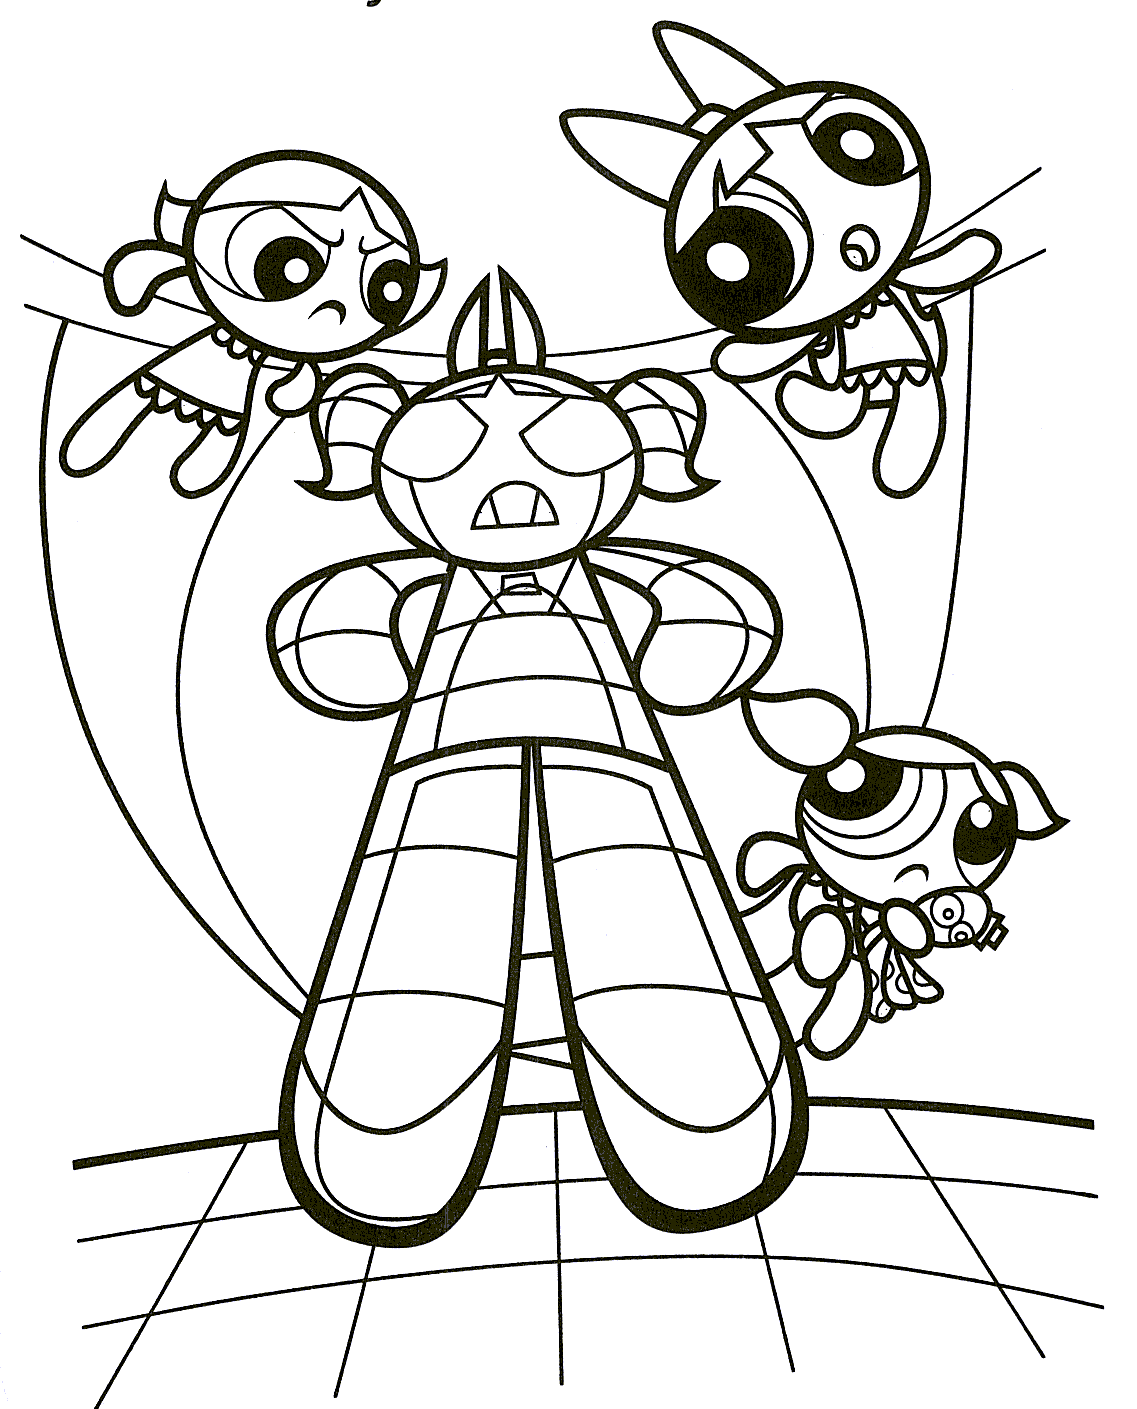 Monster Powerpuff Girls Coloring Pages